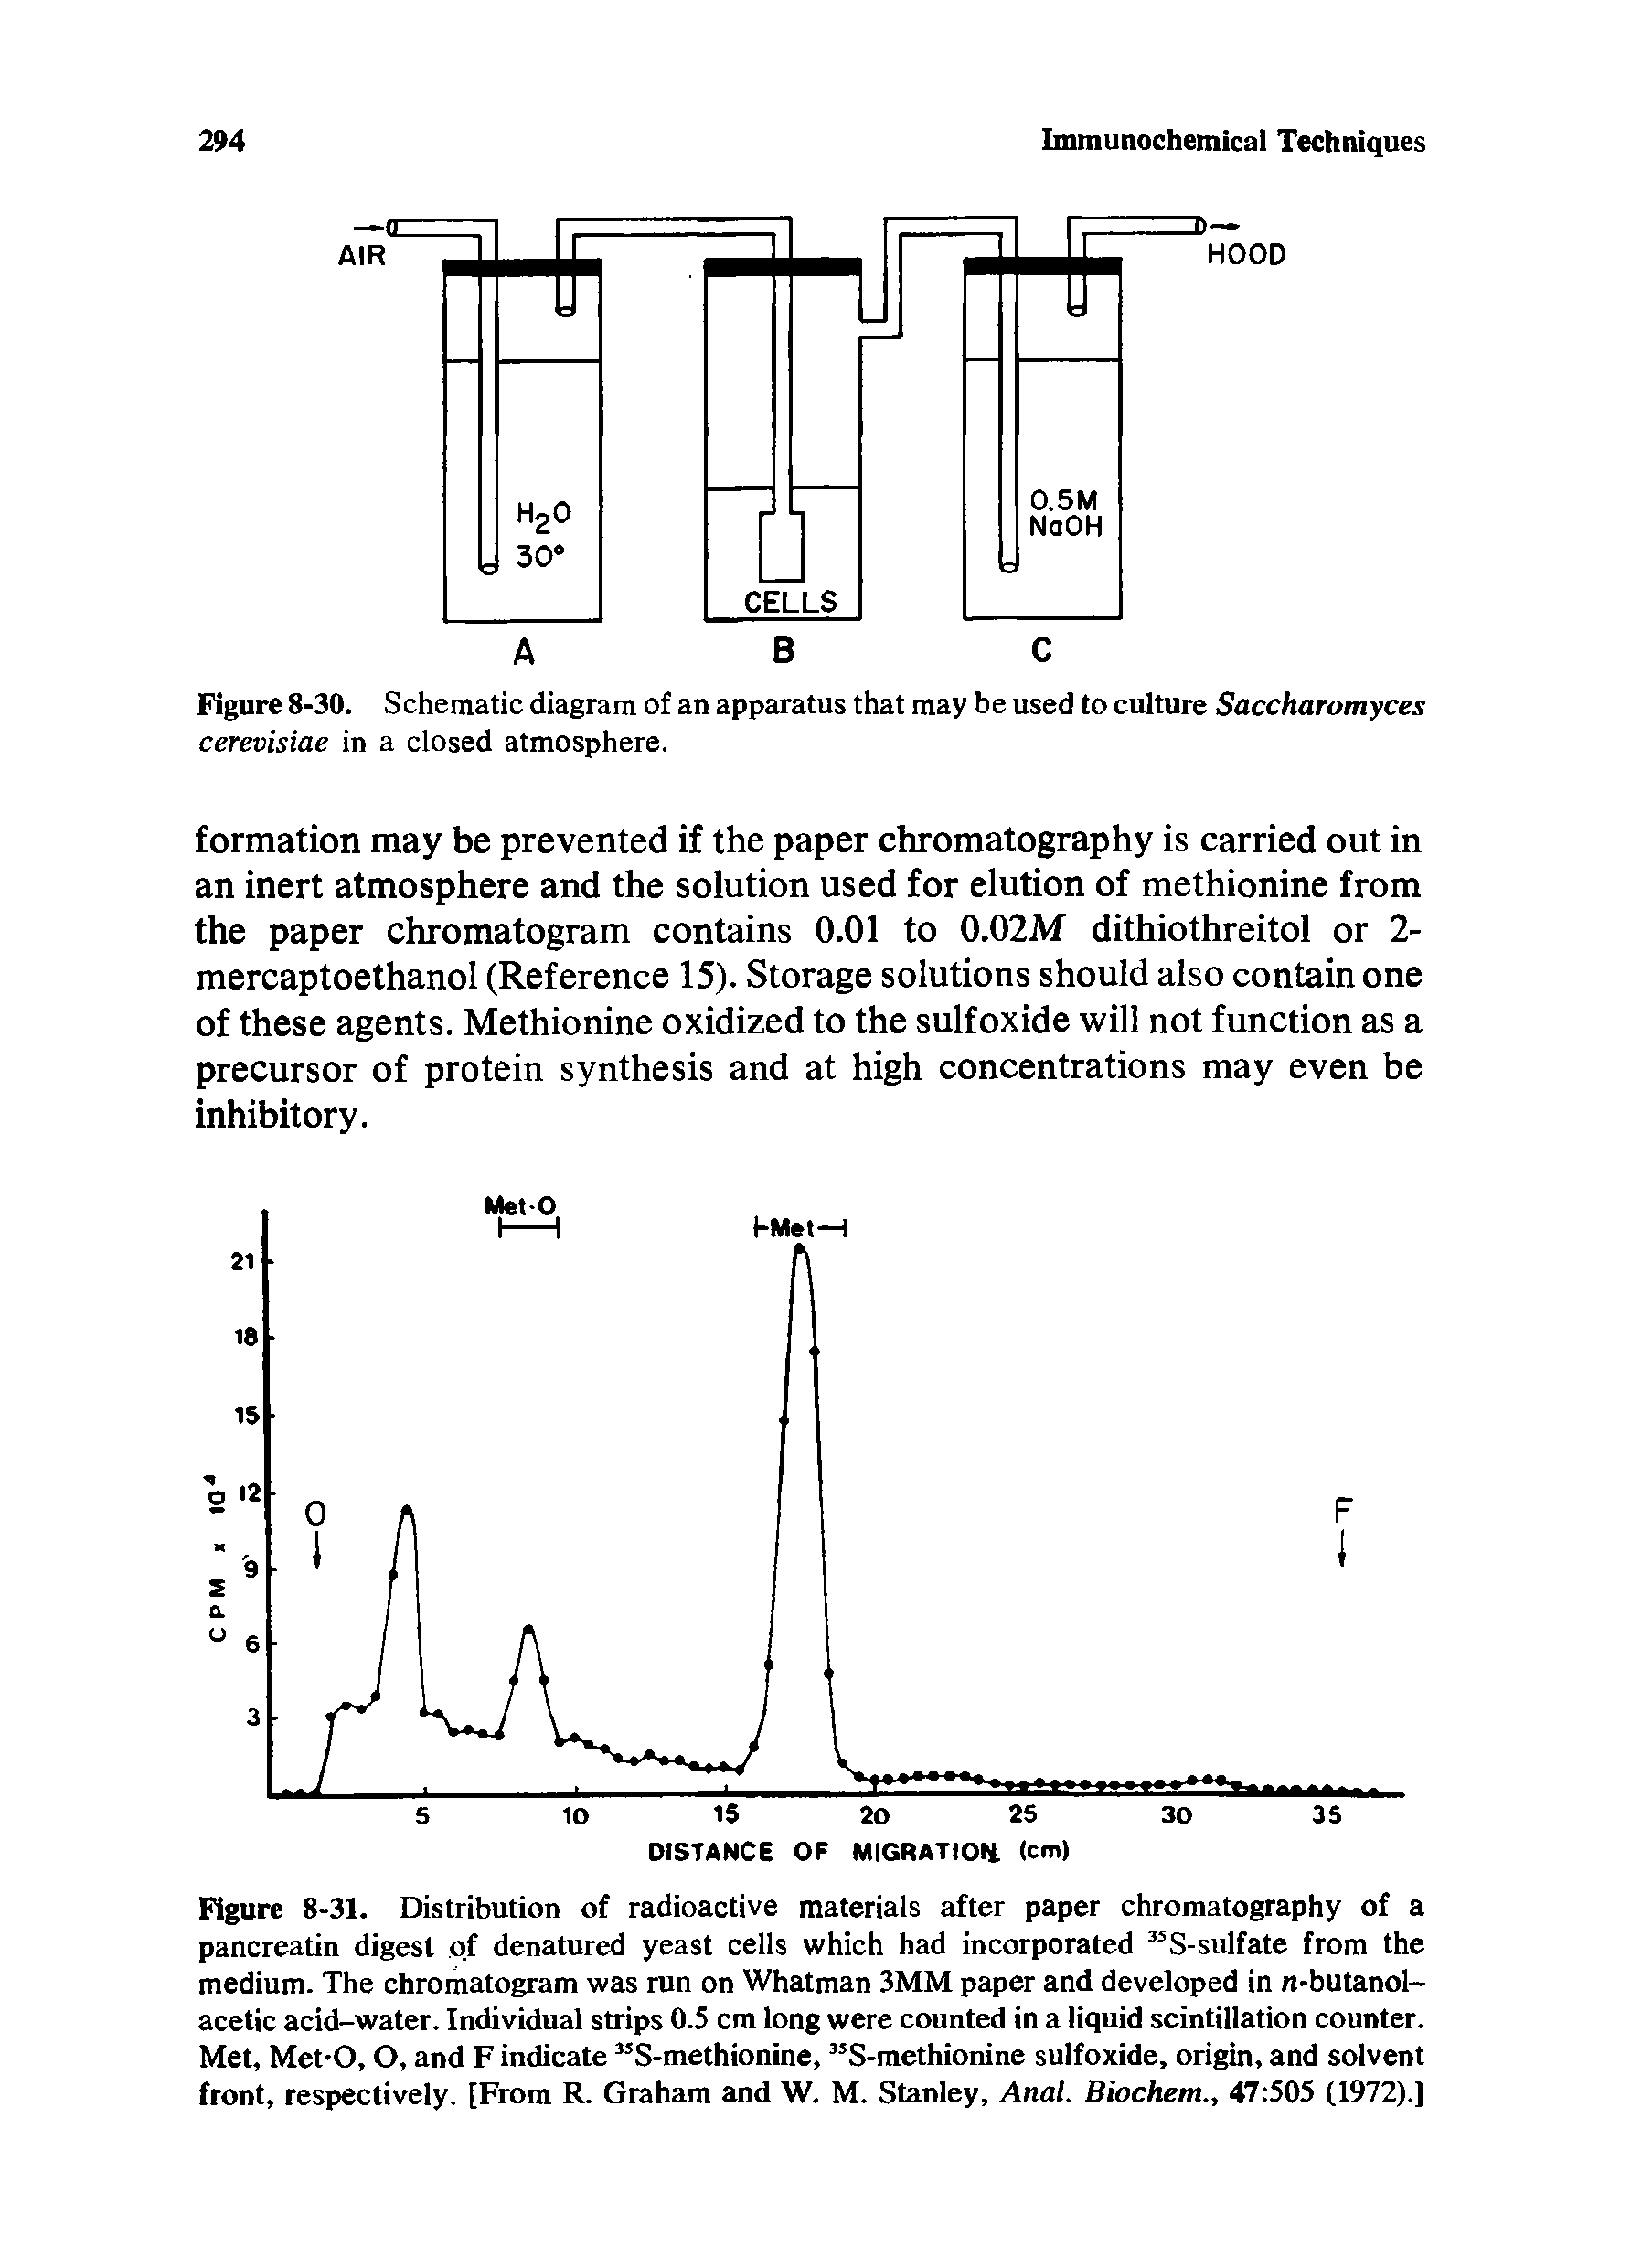 Figure 8-31. Distribution of radioactive materials after paper chromatography of a pancreatin digest of denatured yeast cells which had incorporated S-sulfate from the medium. The chromatogram was run on Whatman 3MM paper and developed in n-butanol-acetic acid-water. Individual strips 0.5 cm long were counted in a liquid scintillation counter. Met, Met-O, O, and F indicate S-methionine, S-methionine sulfoxide, origin, and solvent front, respectively. [From R. Graham and W. M. Stanley, Anal. Biochem., 47 505 (1972).]...